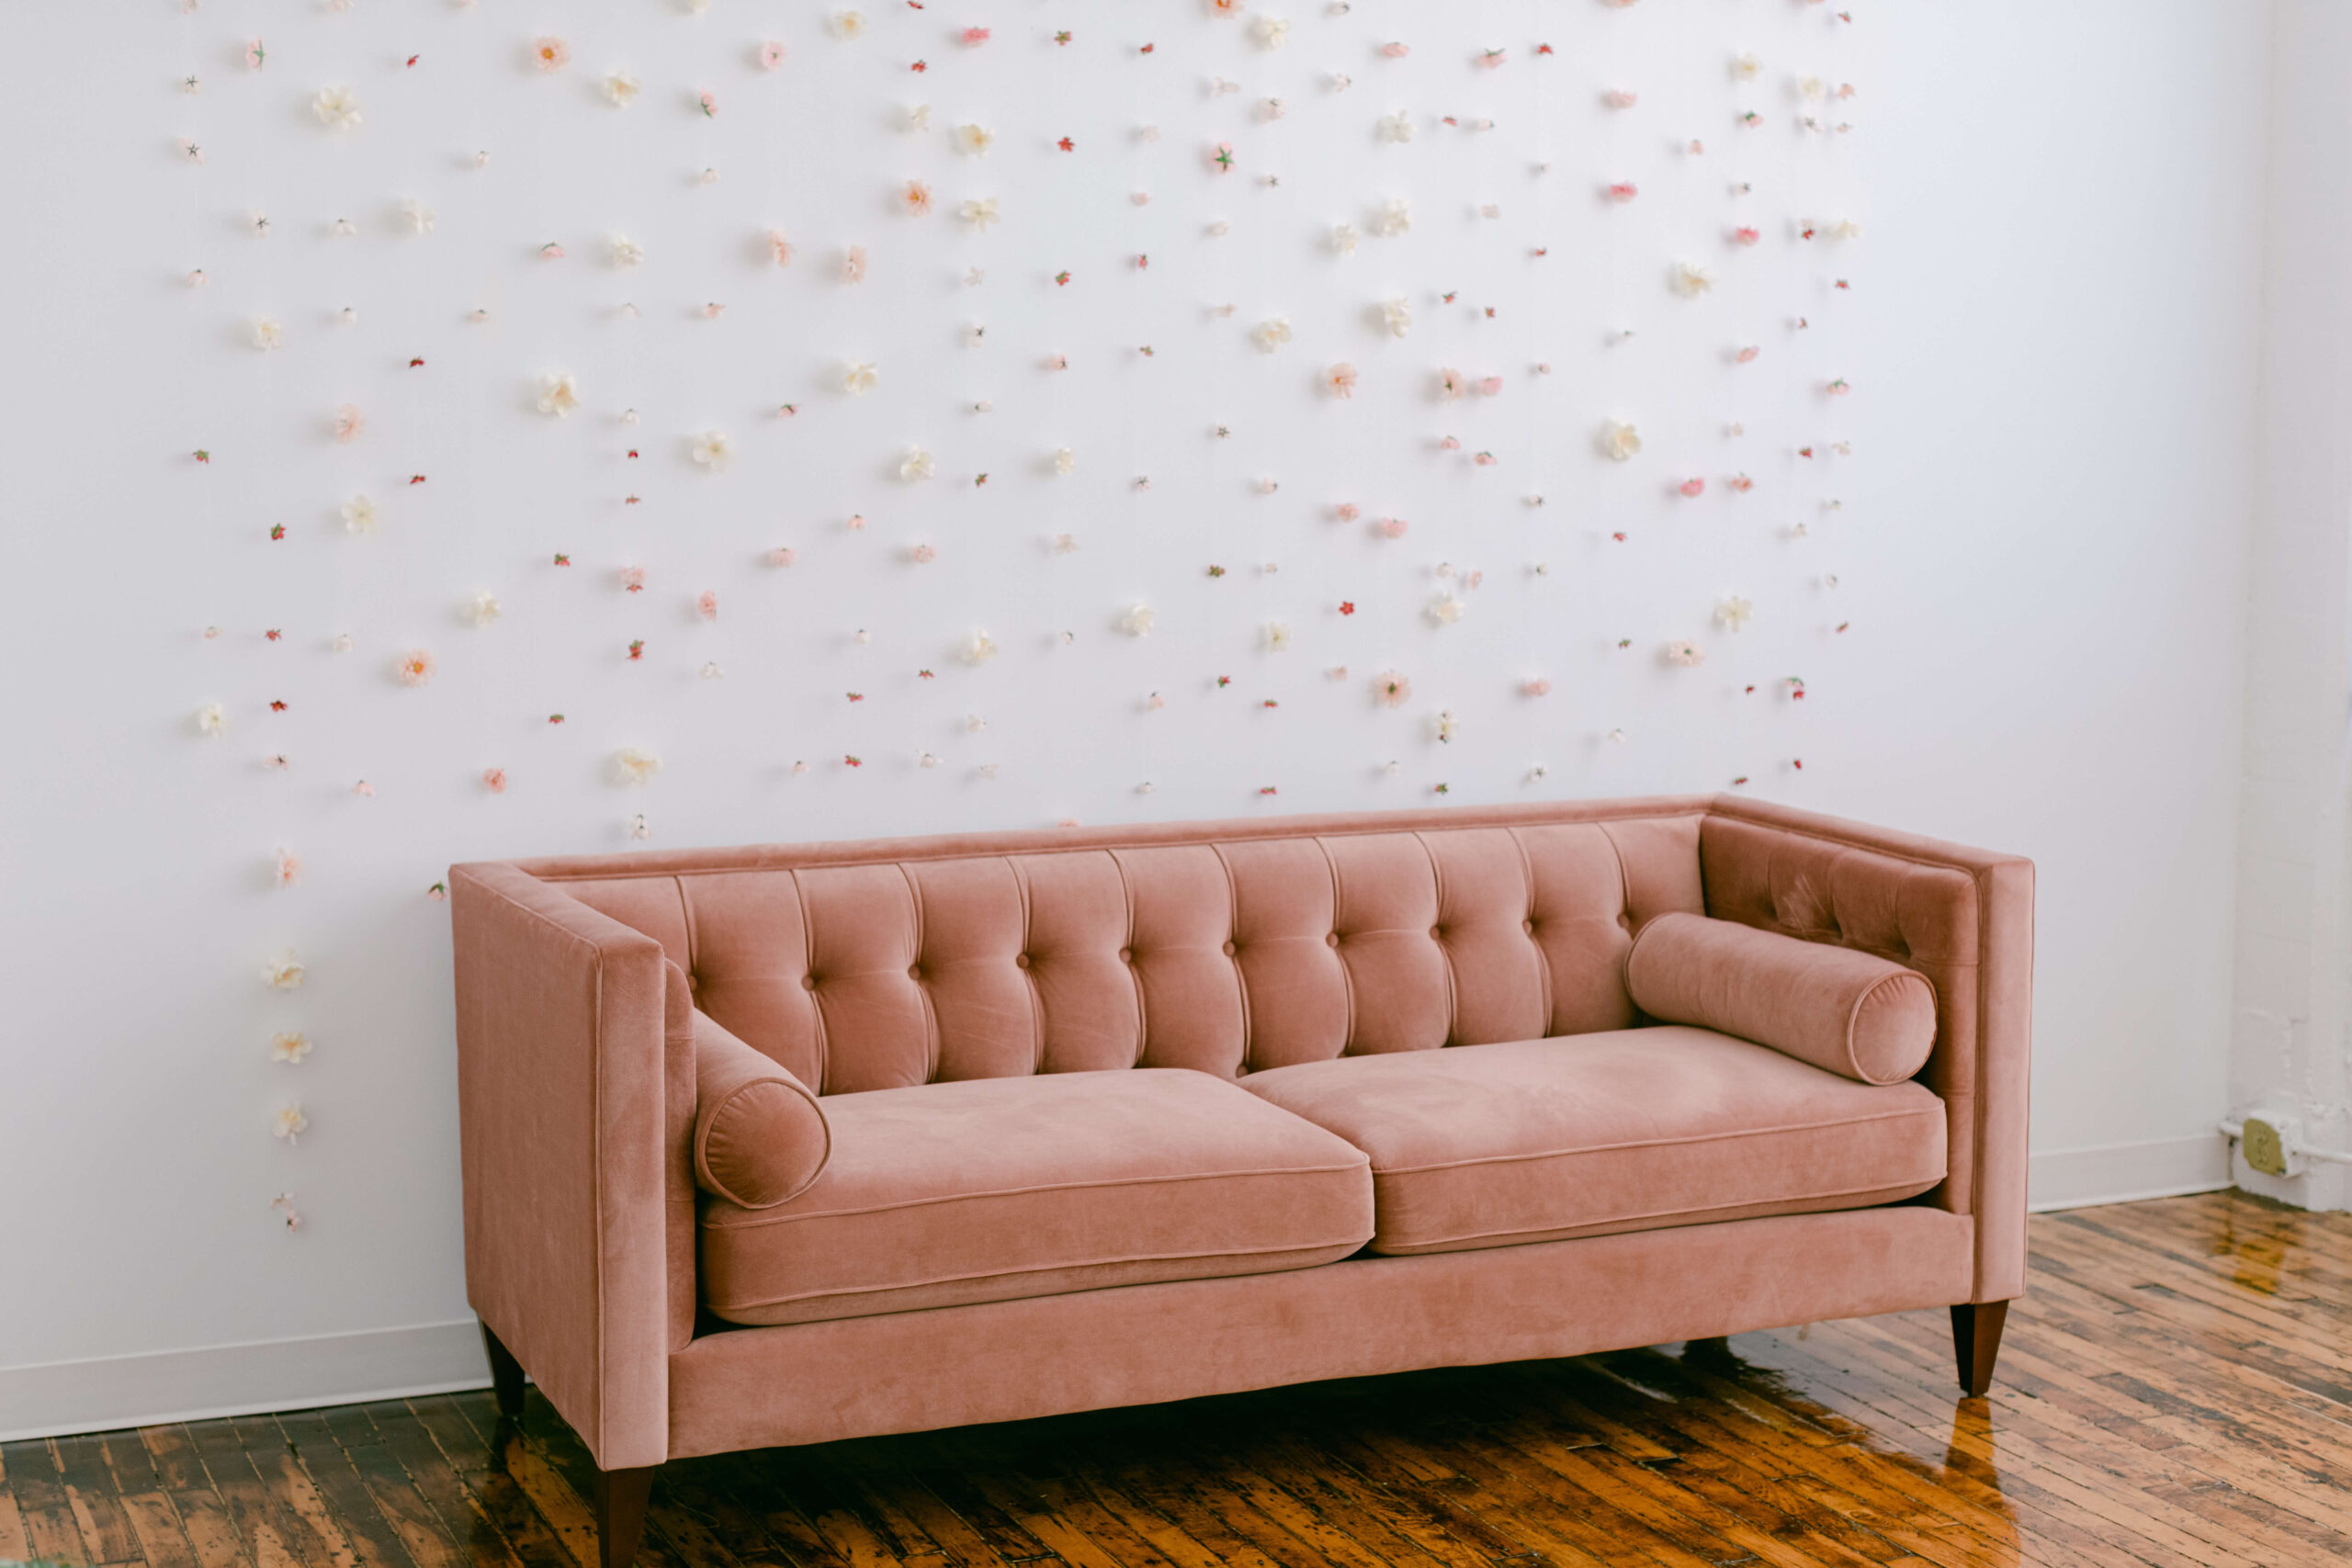 A pink couch will be able to rent from Rent Pearl as well as other luxury furniture